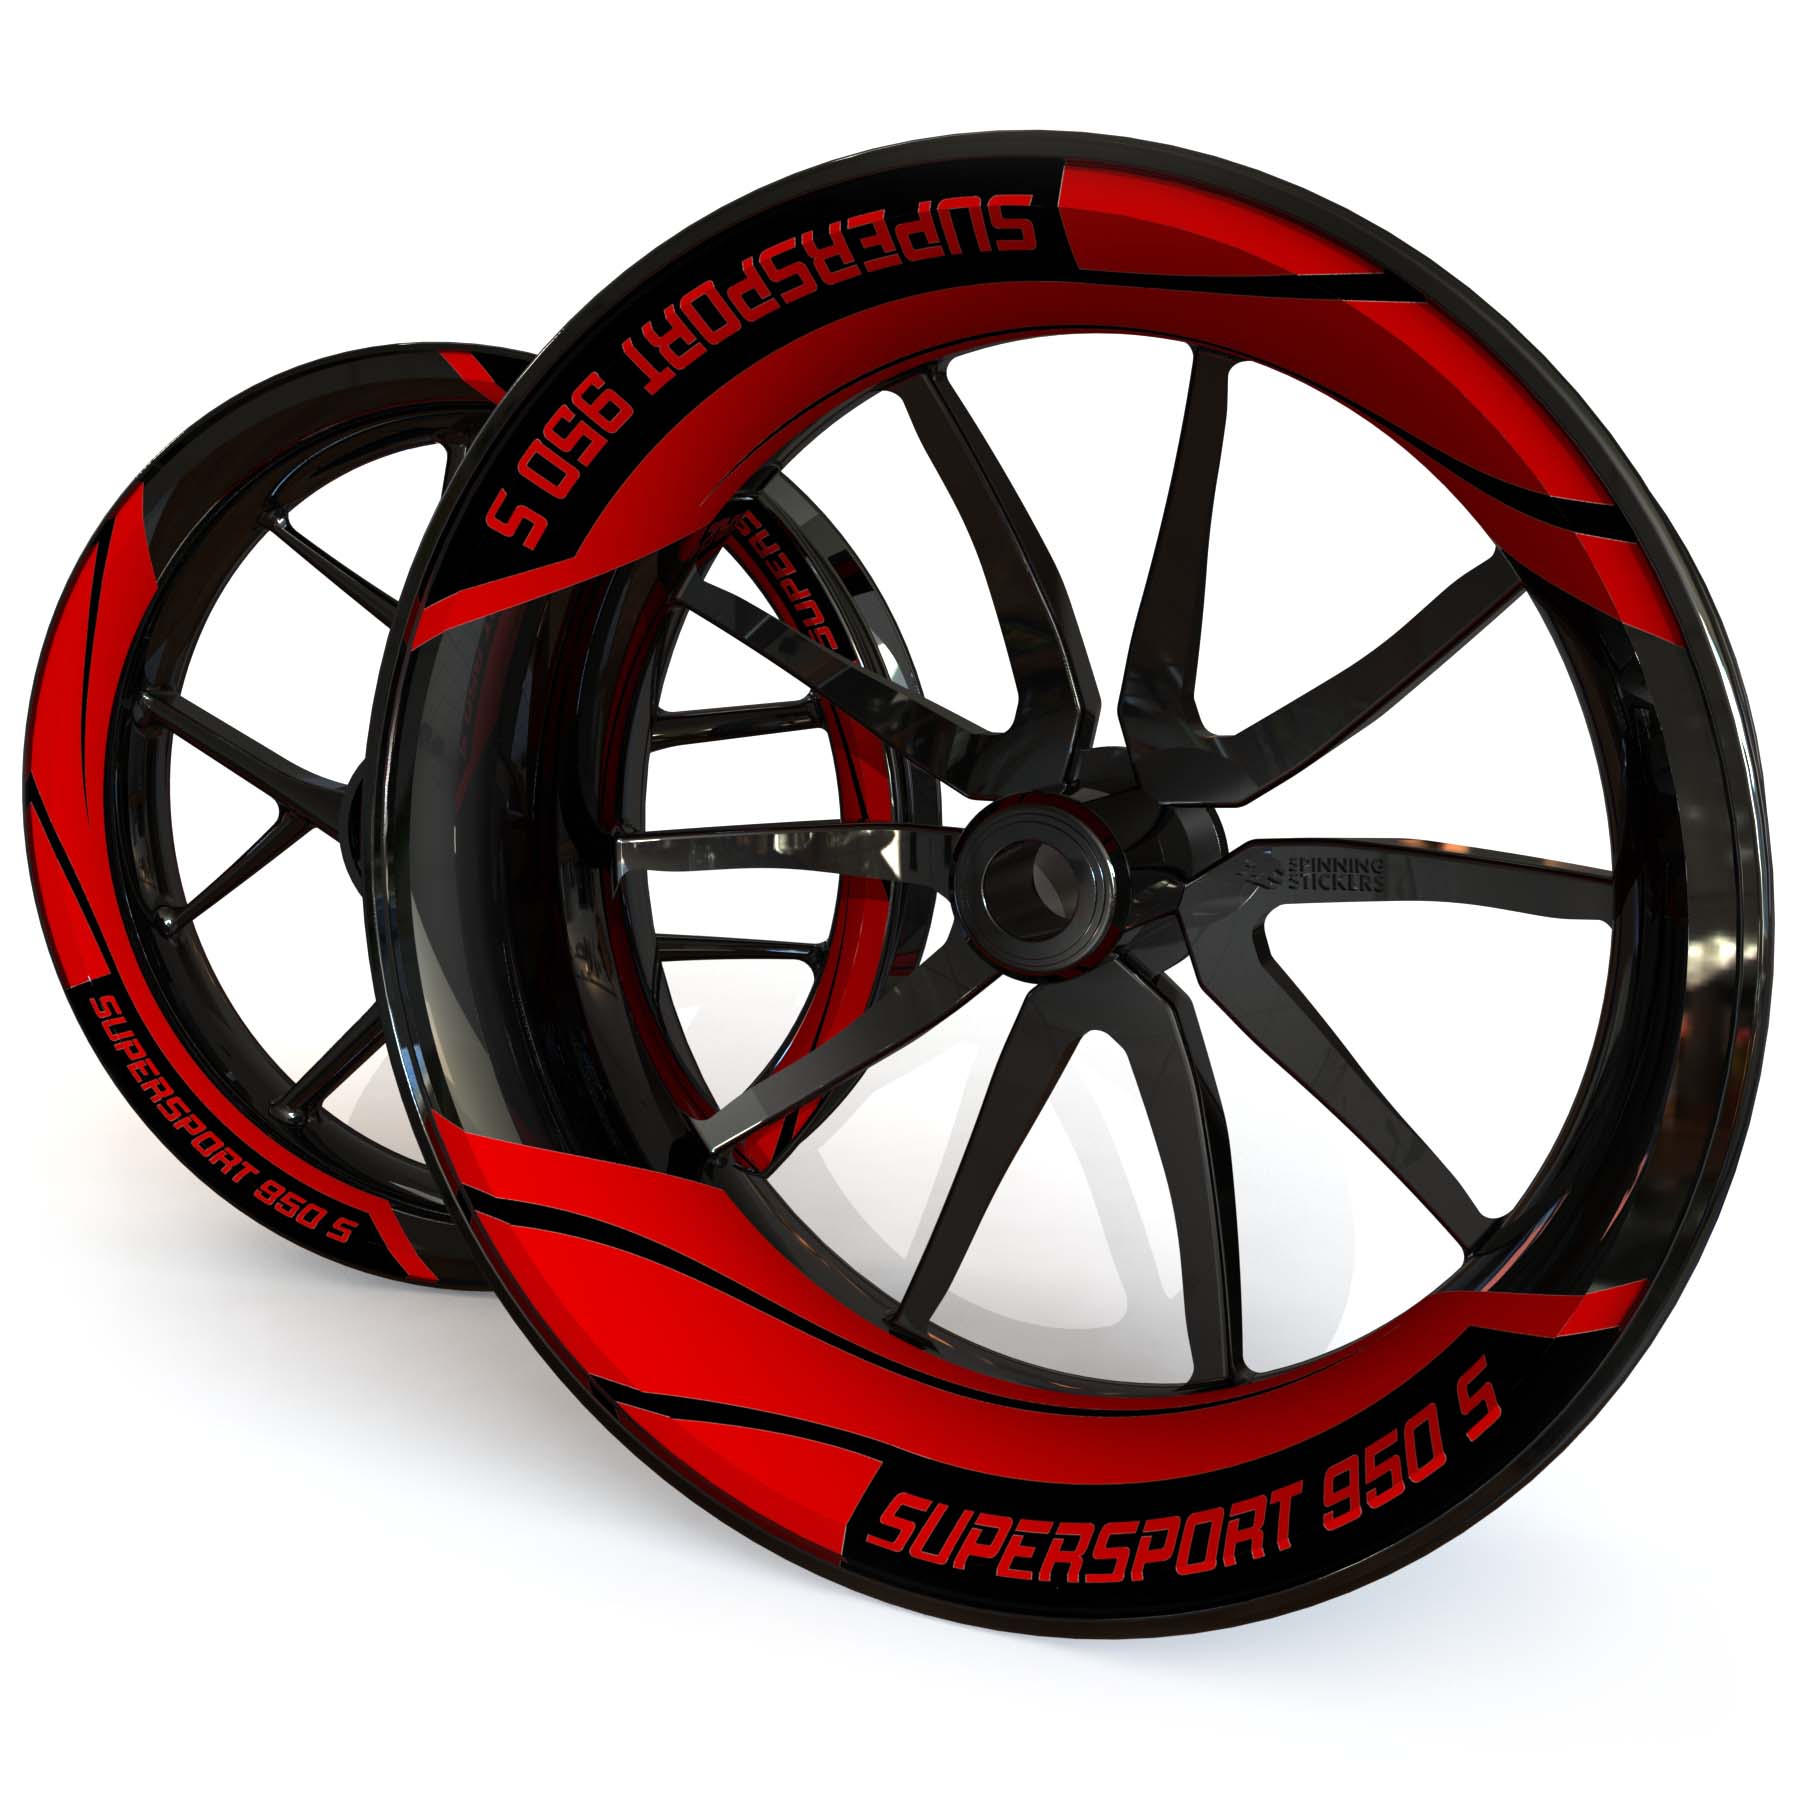 Ducati SuperSport 950 S Wheel Stickers kit - Two Piece Design